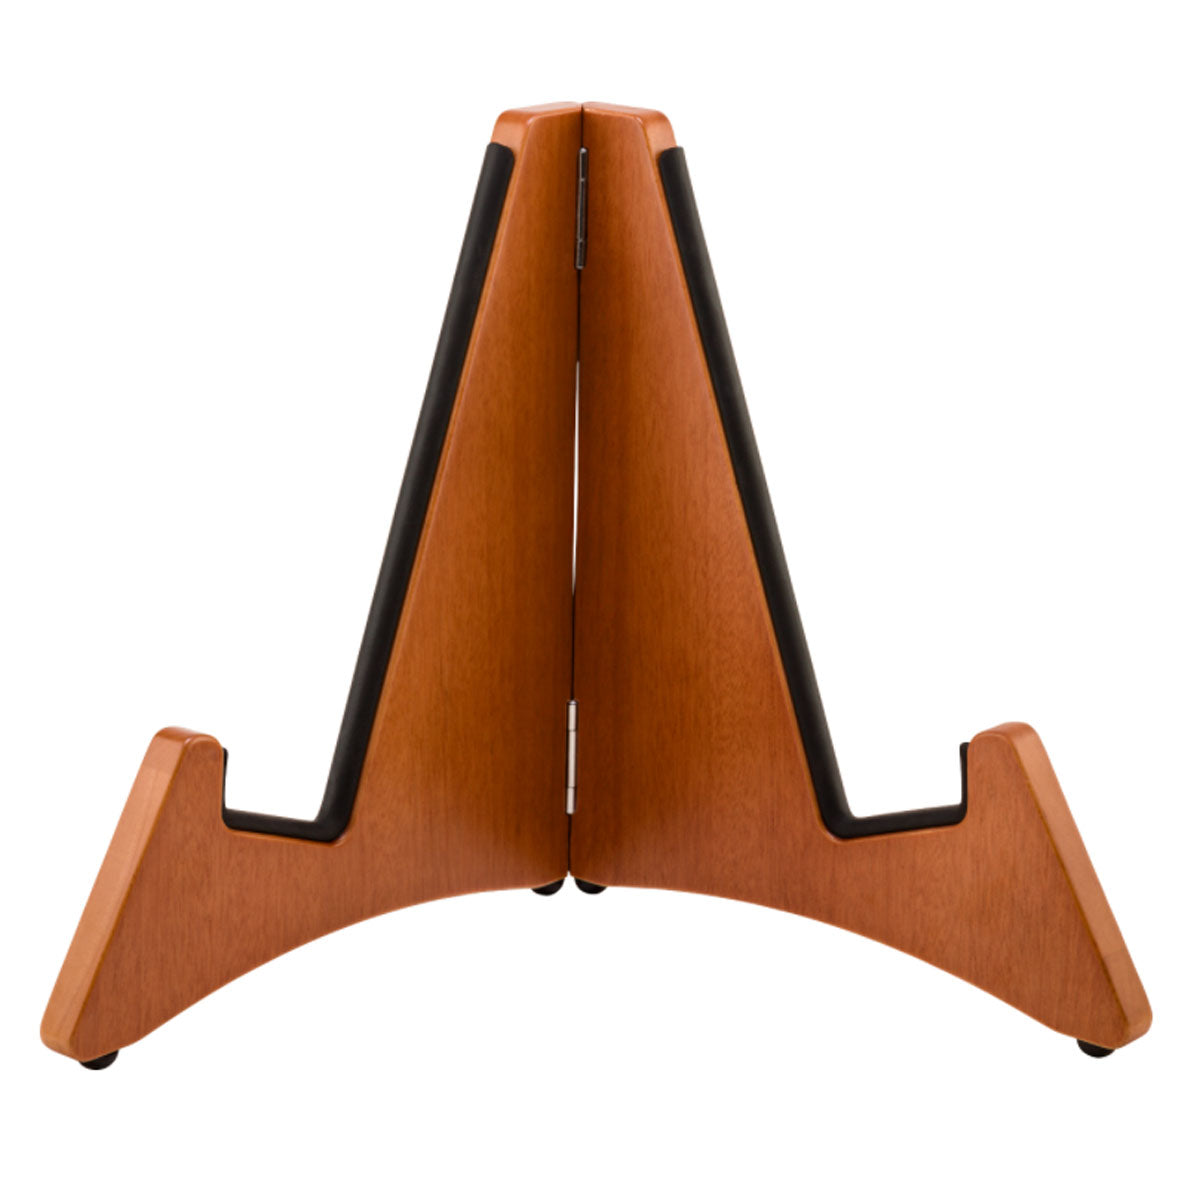 Fender Timberframe Electric Guitar Stand Natural - 0991820007